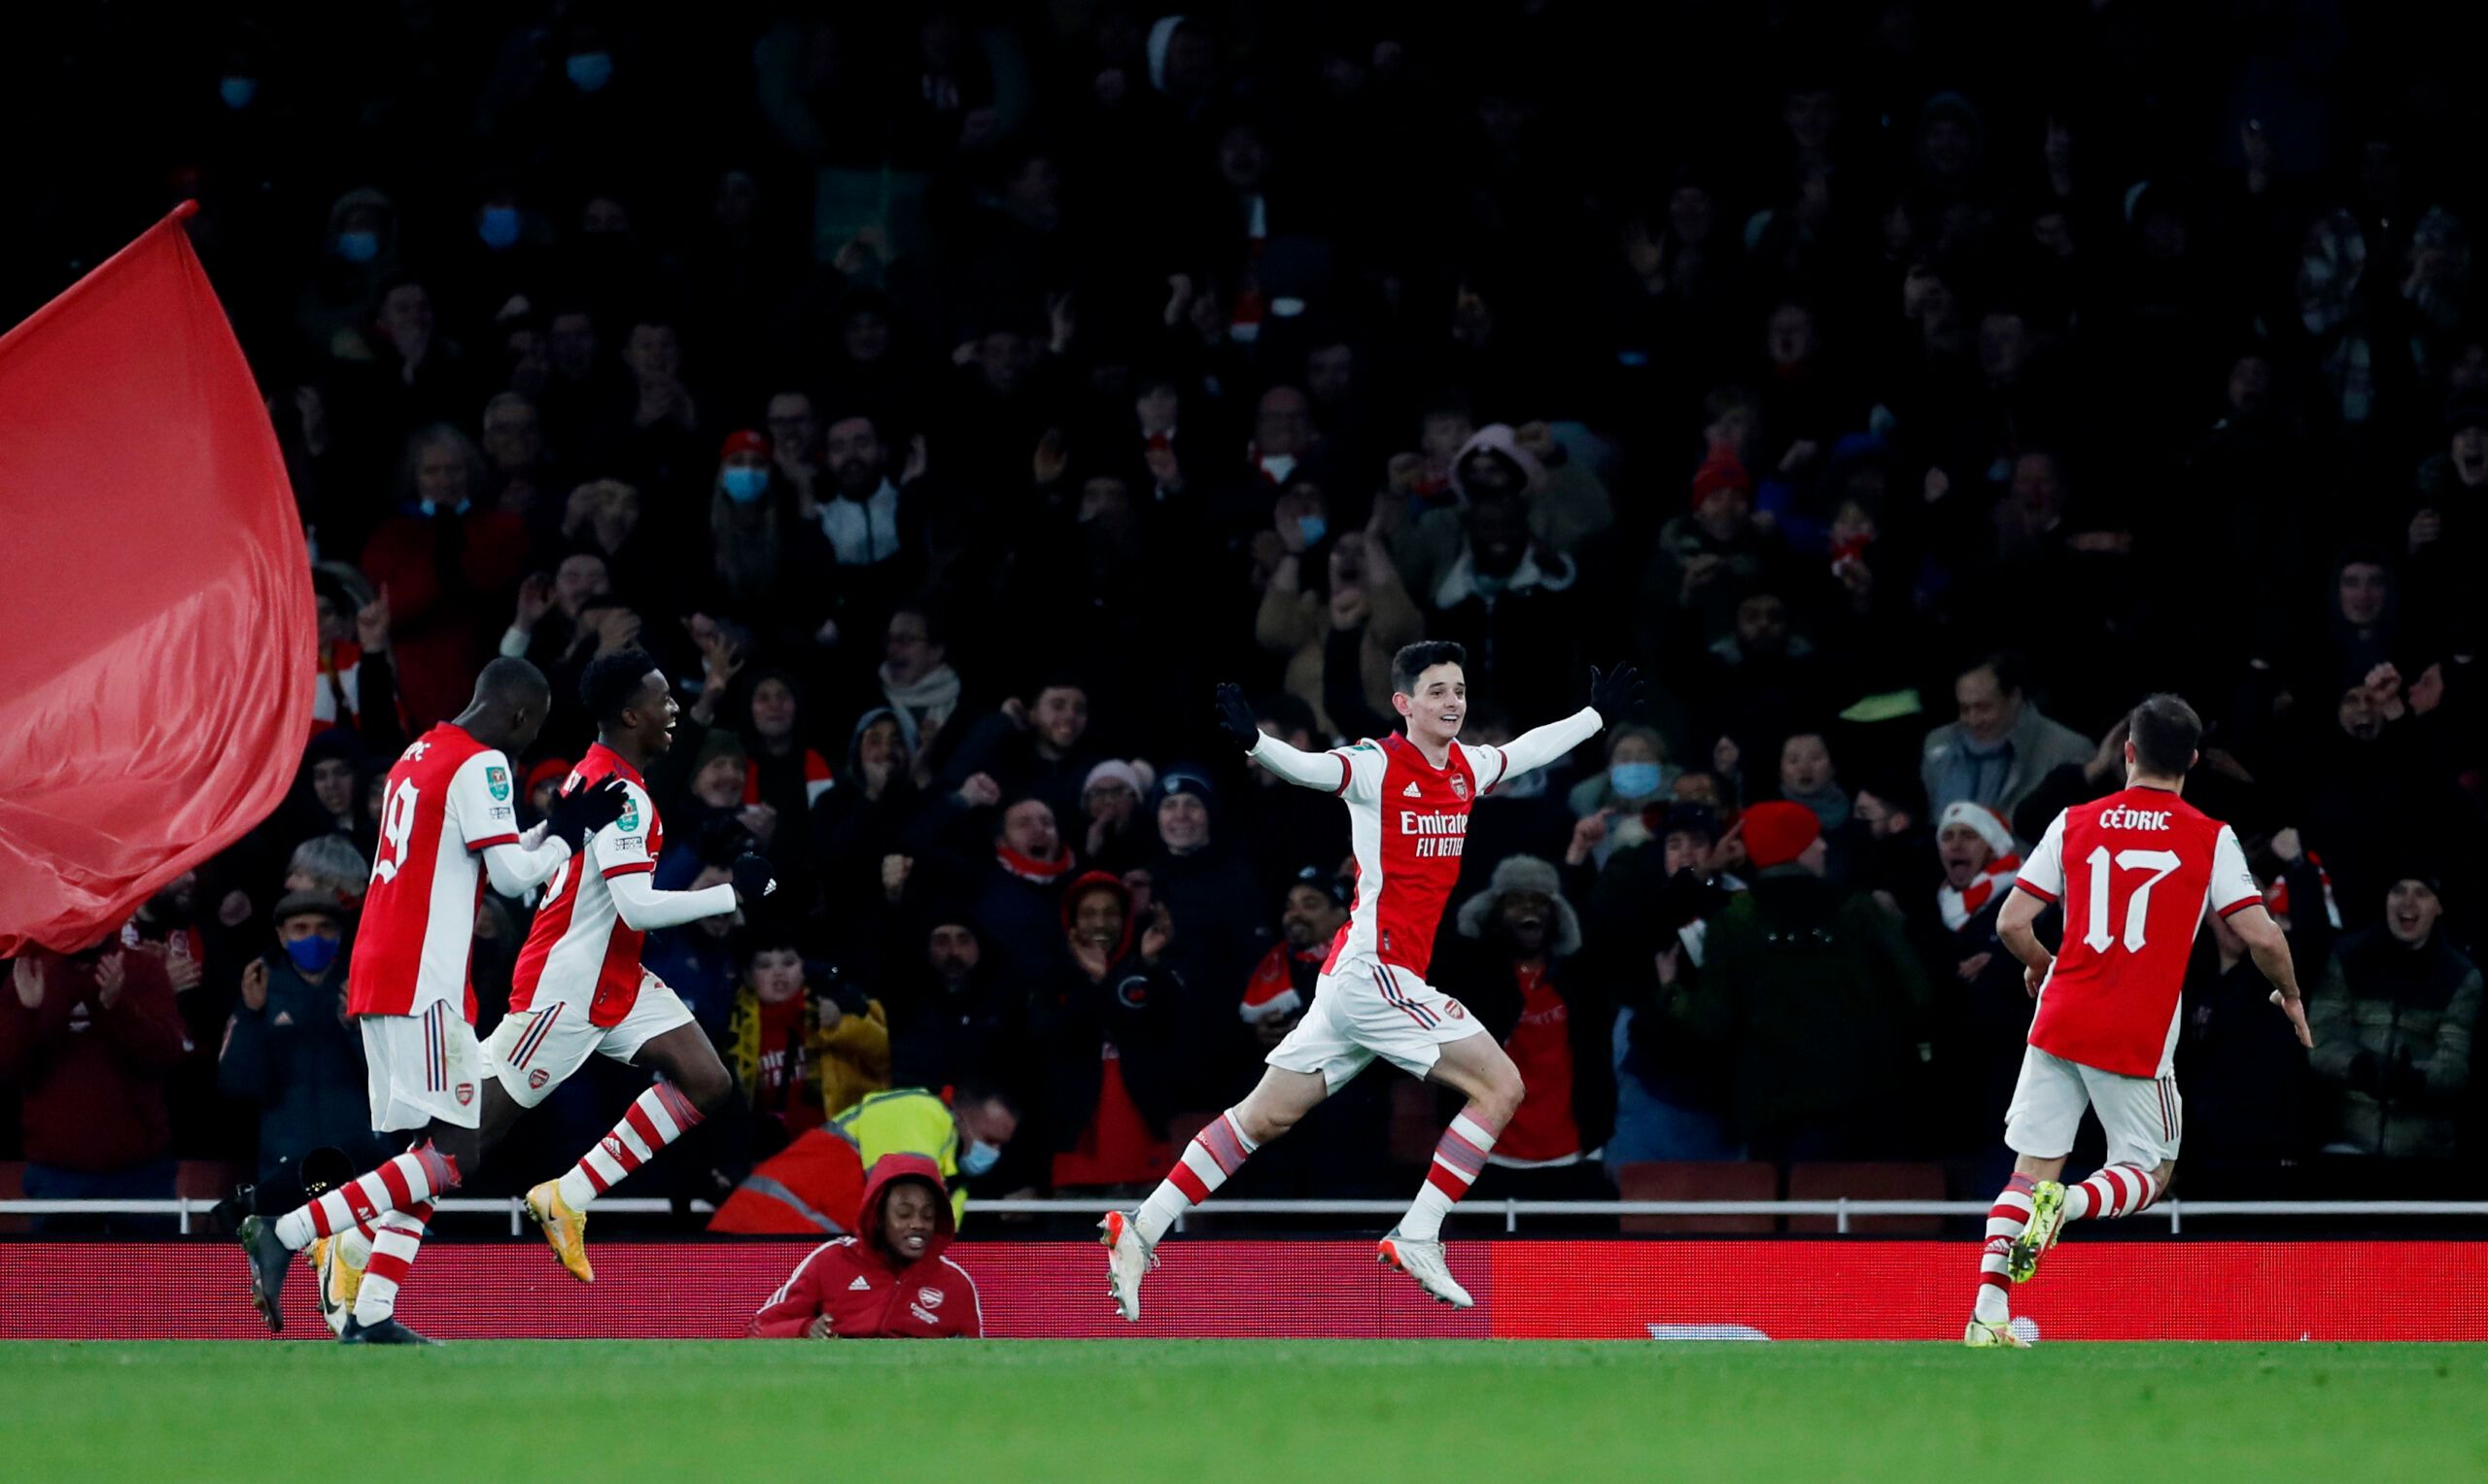 Soccer Football - Carabao Cup - Quarter Final - Arsenal v Sunderland - Emirates Stadium, London, Britain - December 21, 2021 Arsenal's Charlie Patino celebrates scoring their fifth goal Action Images via Reuters/Lee Smith EDITORIAL USE ONLY. No use with unauthorized audio, video, data, fixture lists, club/league logos or 'live' services. Online in-match use limited to 75 images, no video emulation. No use in betting, games or single club /league/player publications.  Please contact your account 